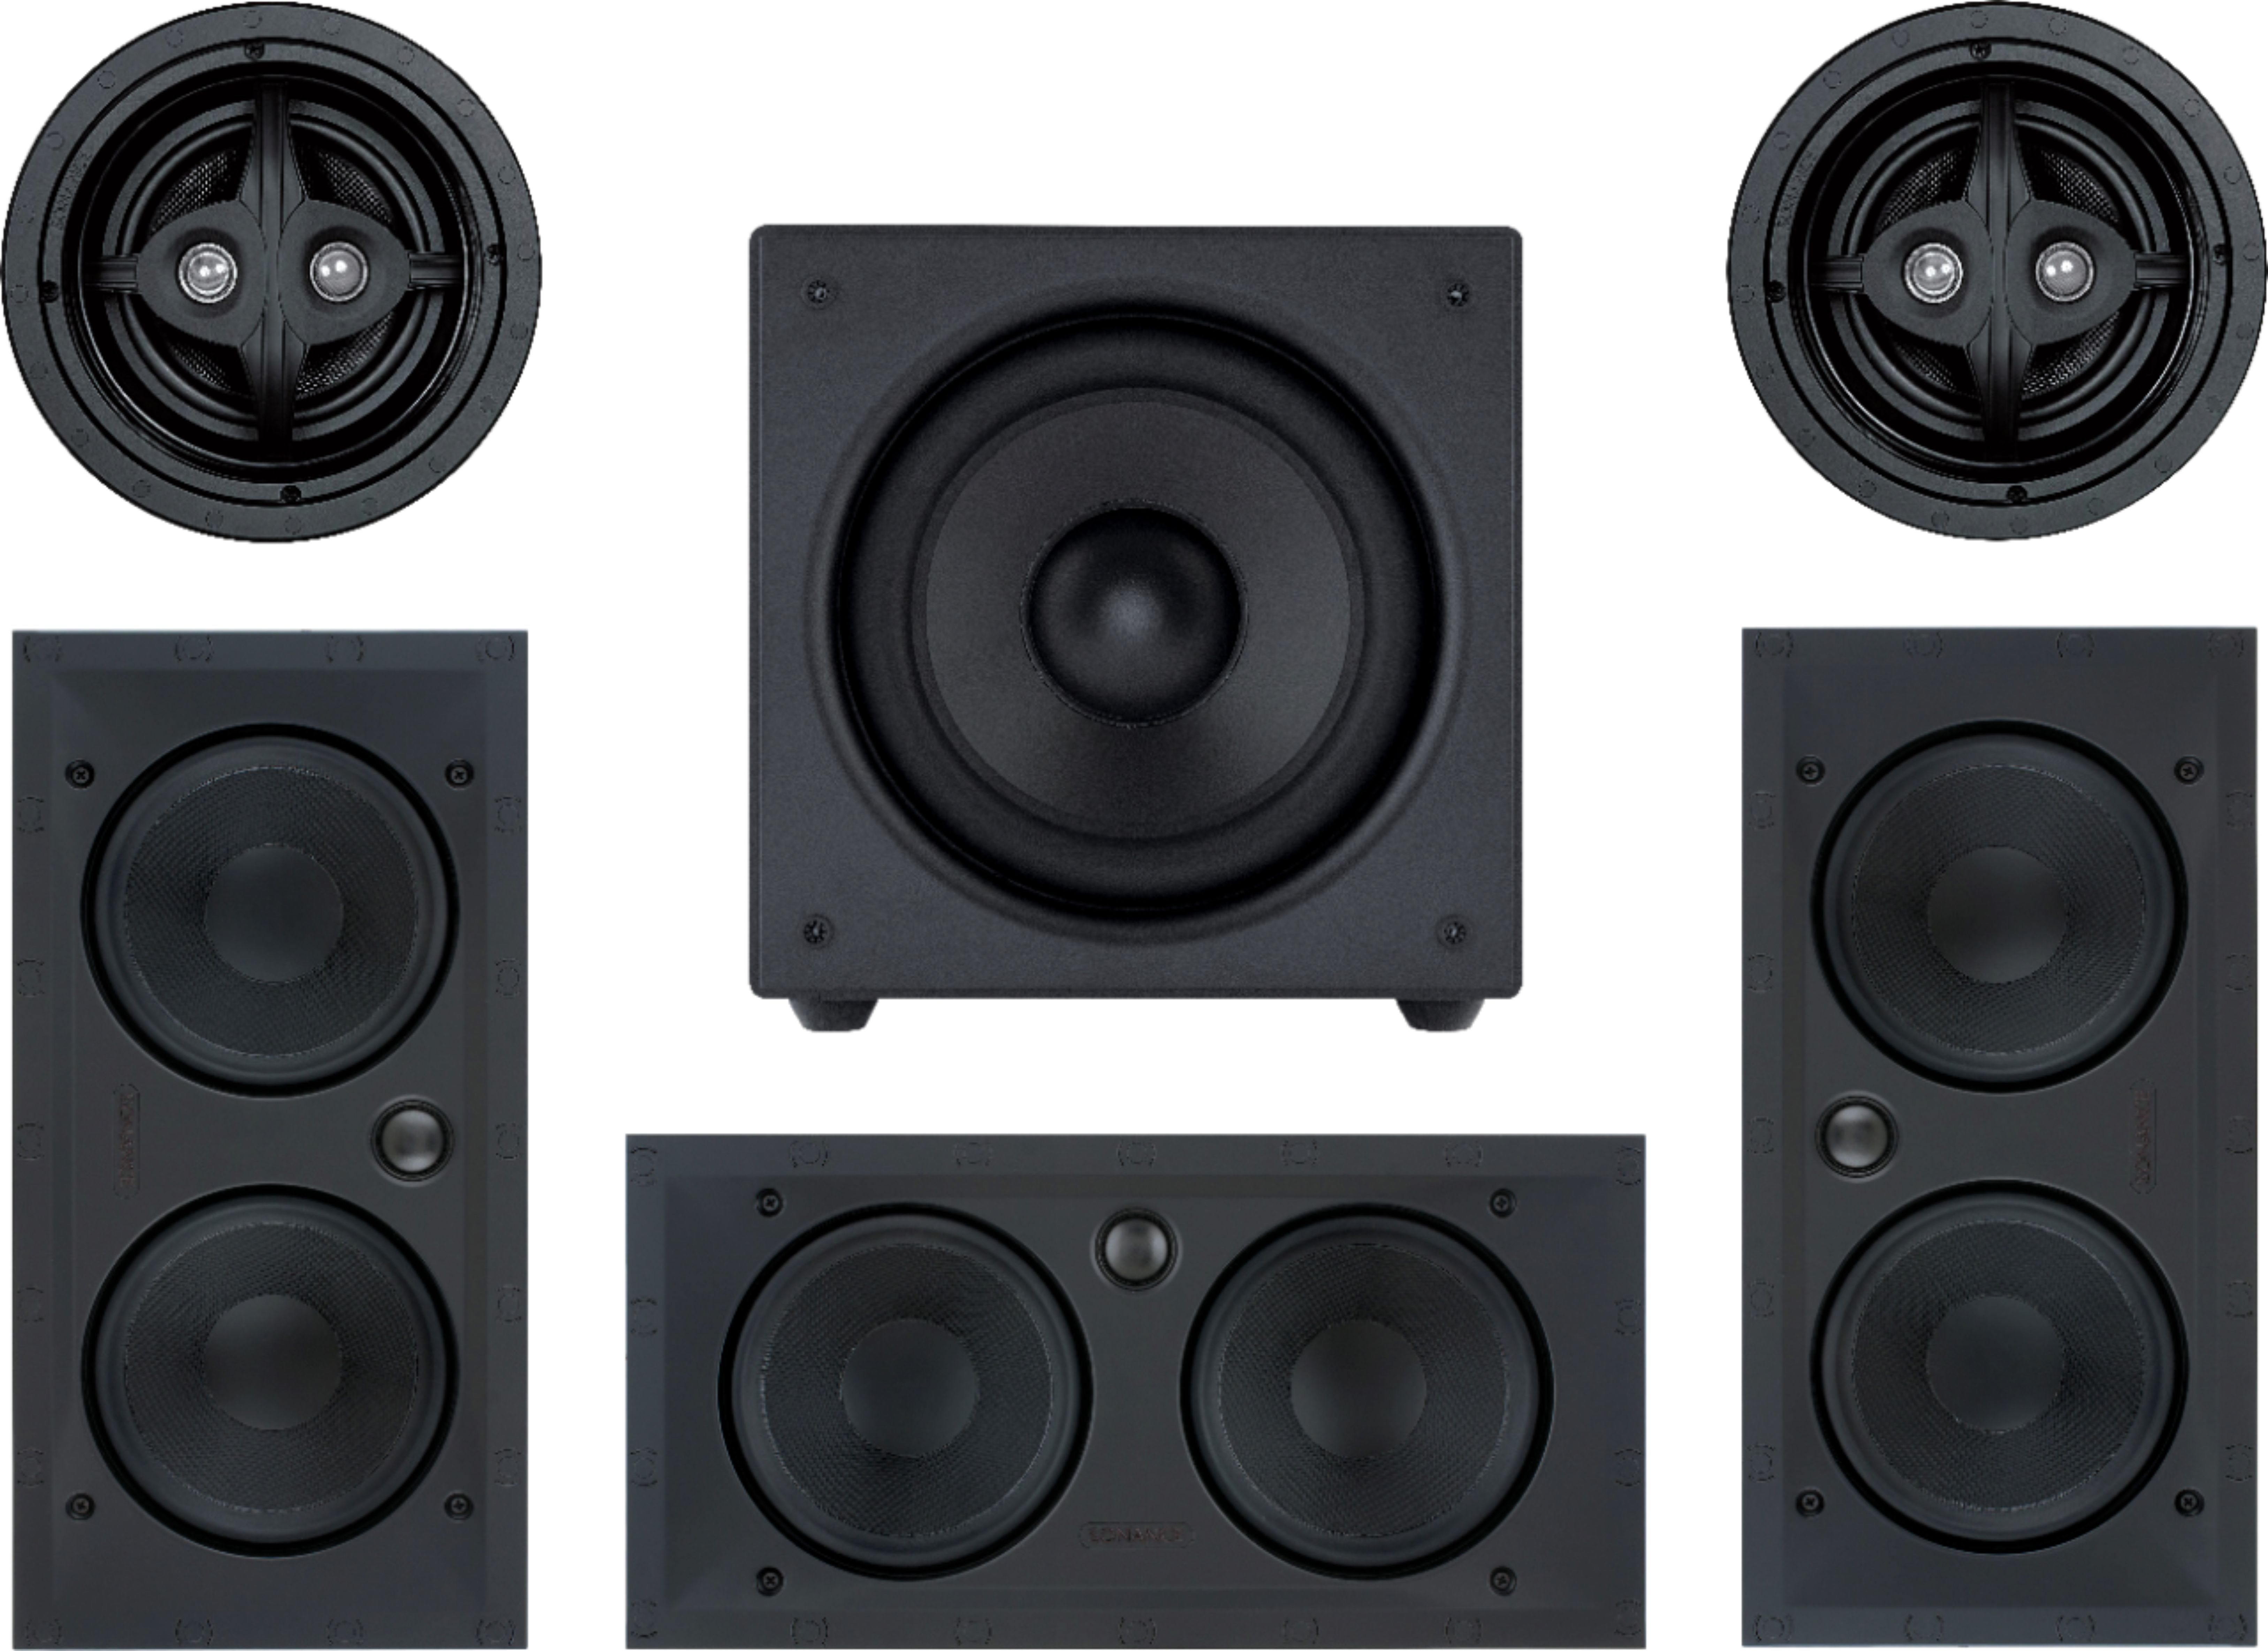 Sonance - MAG5.1 Premium 6-1/2" In-Wall Speaker System with Wireless Subwoofer - Paintable White